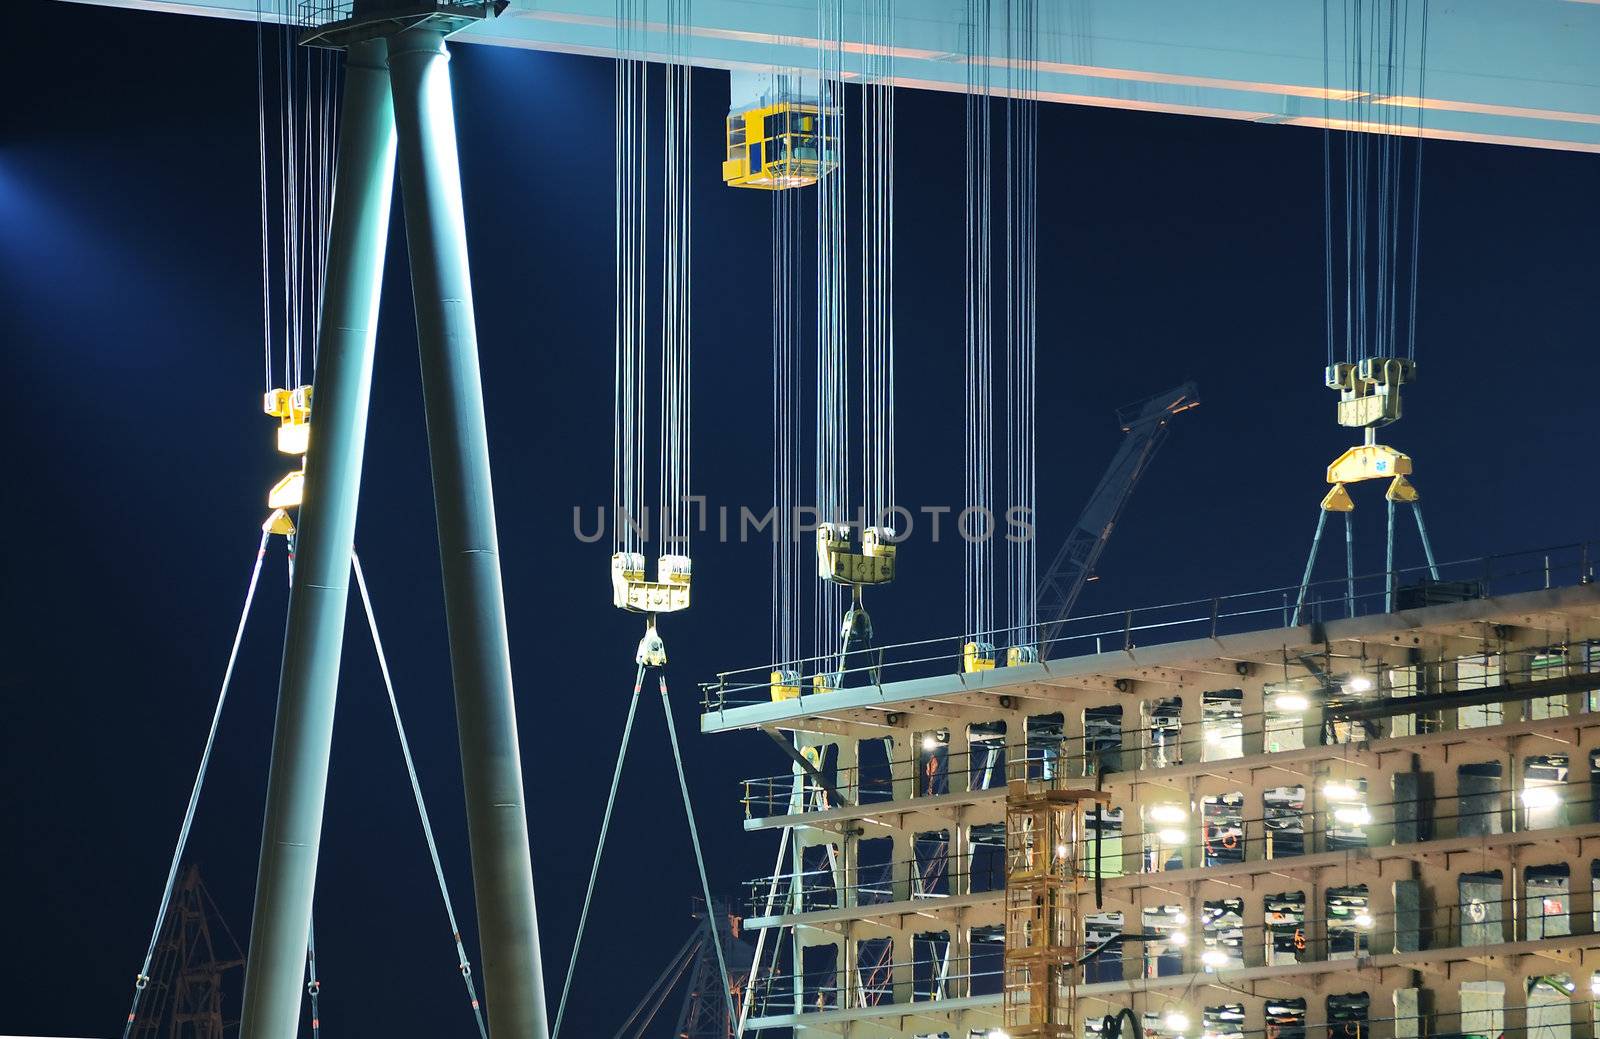 Detail of cranes and hooks in a shipyard by night